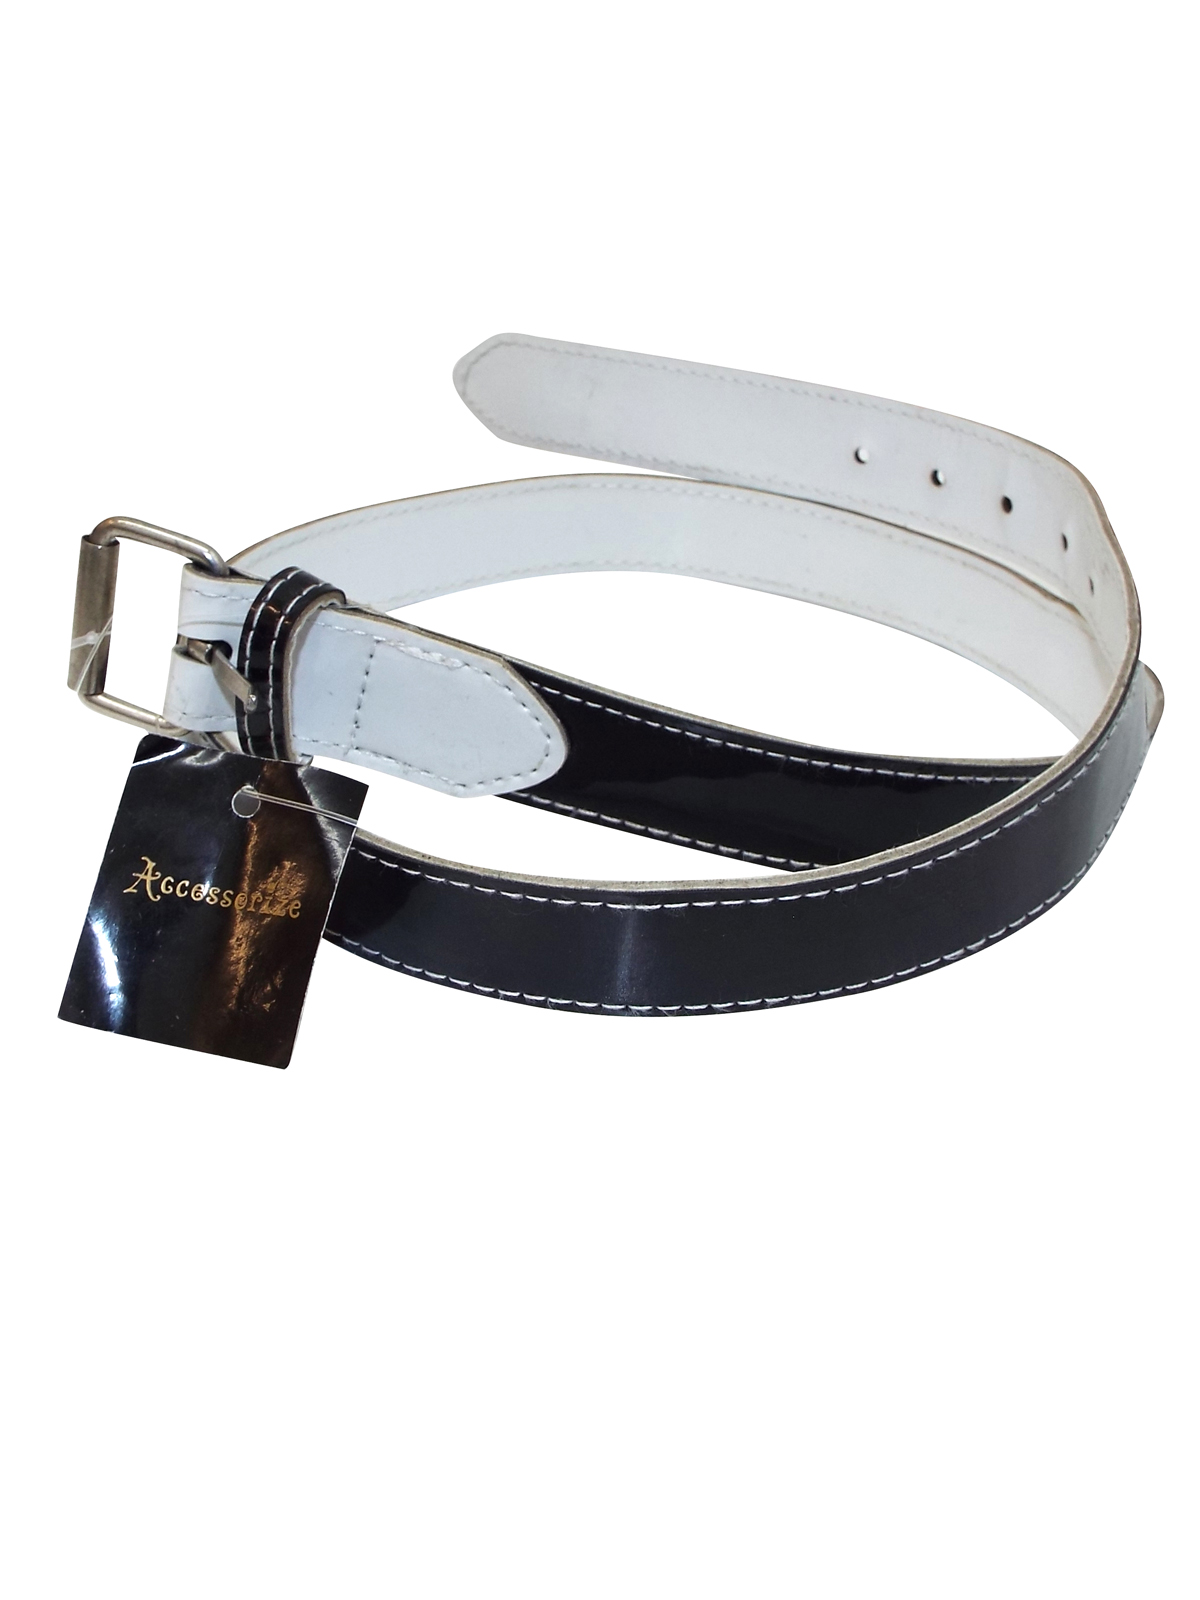 Accessorize BLACK Contrast Trim Patent Belt - Size Small to Large